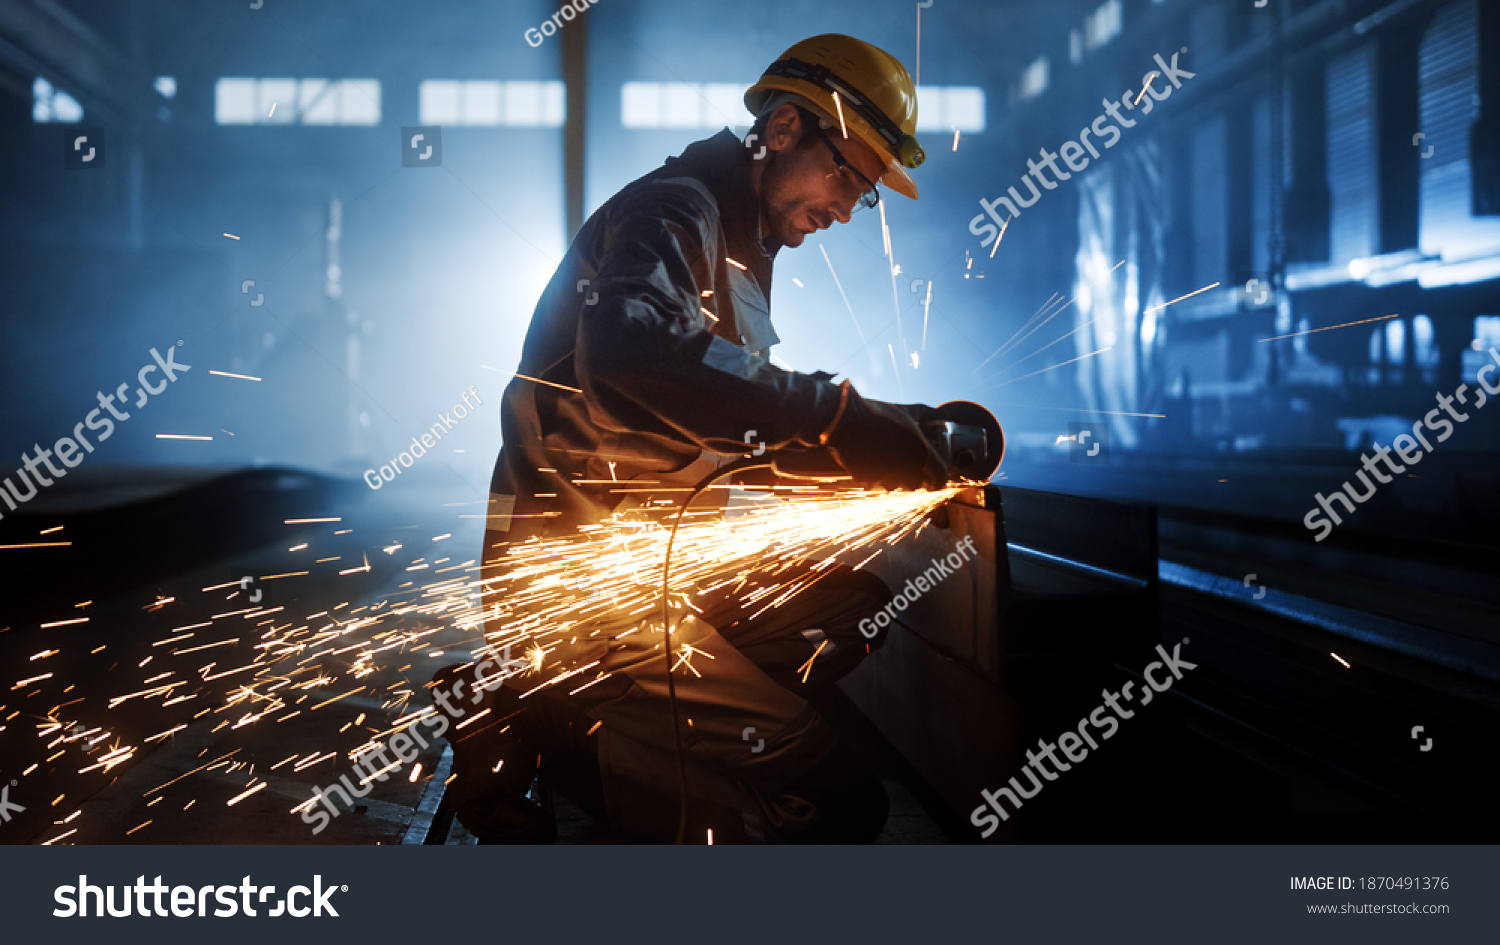 Heavy Industry Engineering Factory Interior with Industrial Worker Using Angle Grinder and Cutting a Metal Tube. Contractor in Safety Uniform and Hard Hat Manufacturing Metal Structures. #1870491376